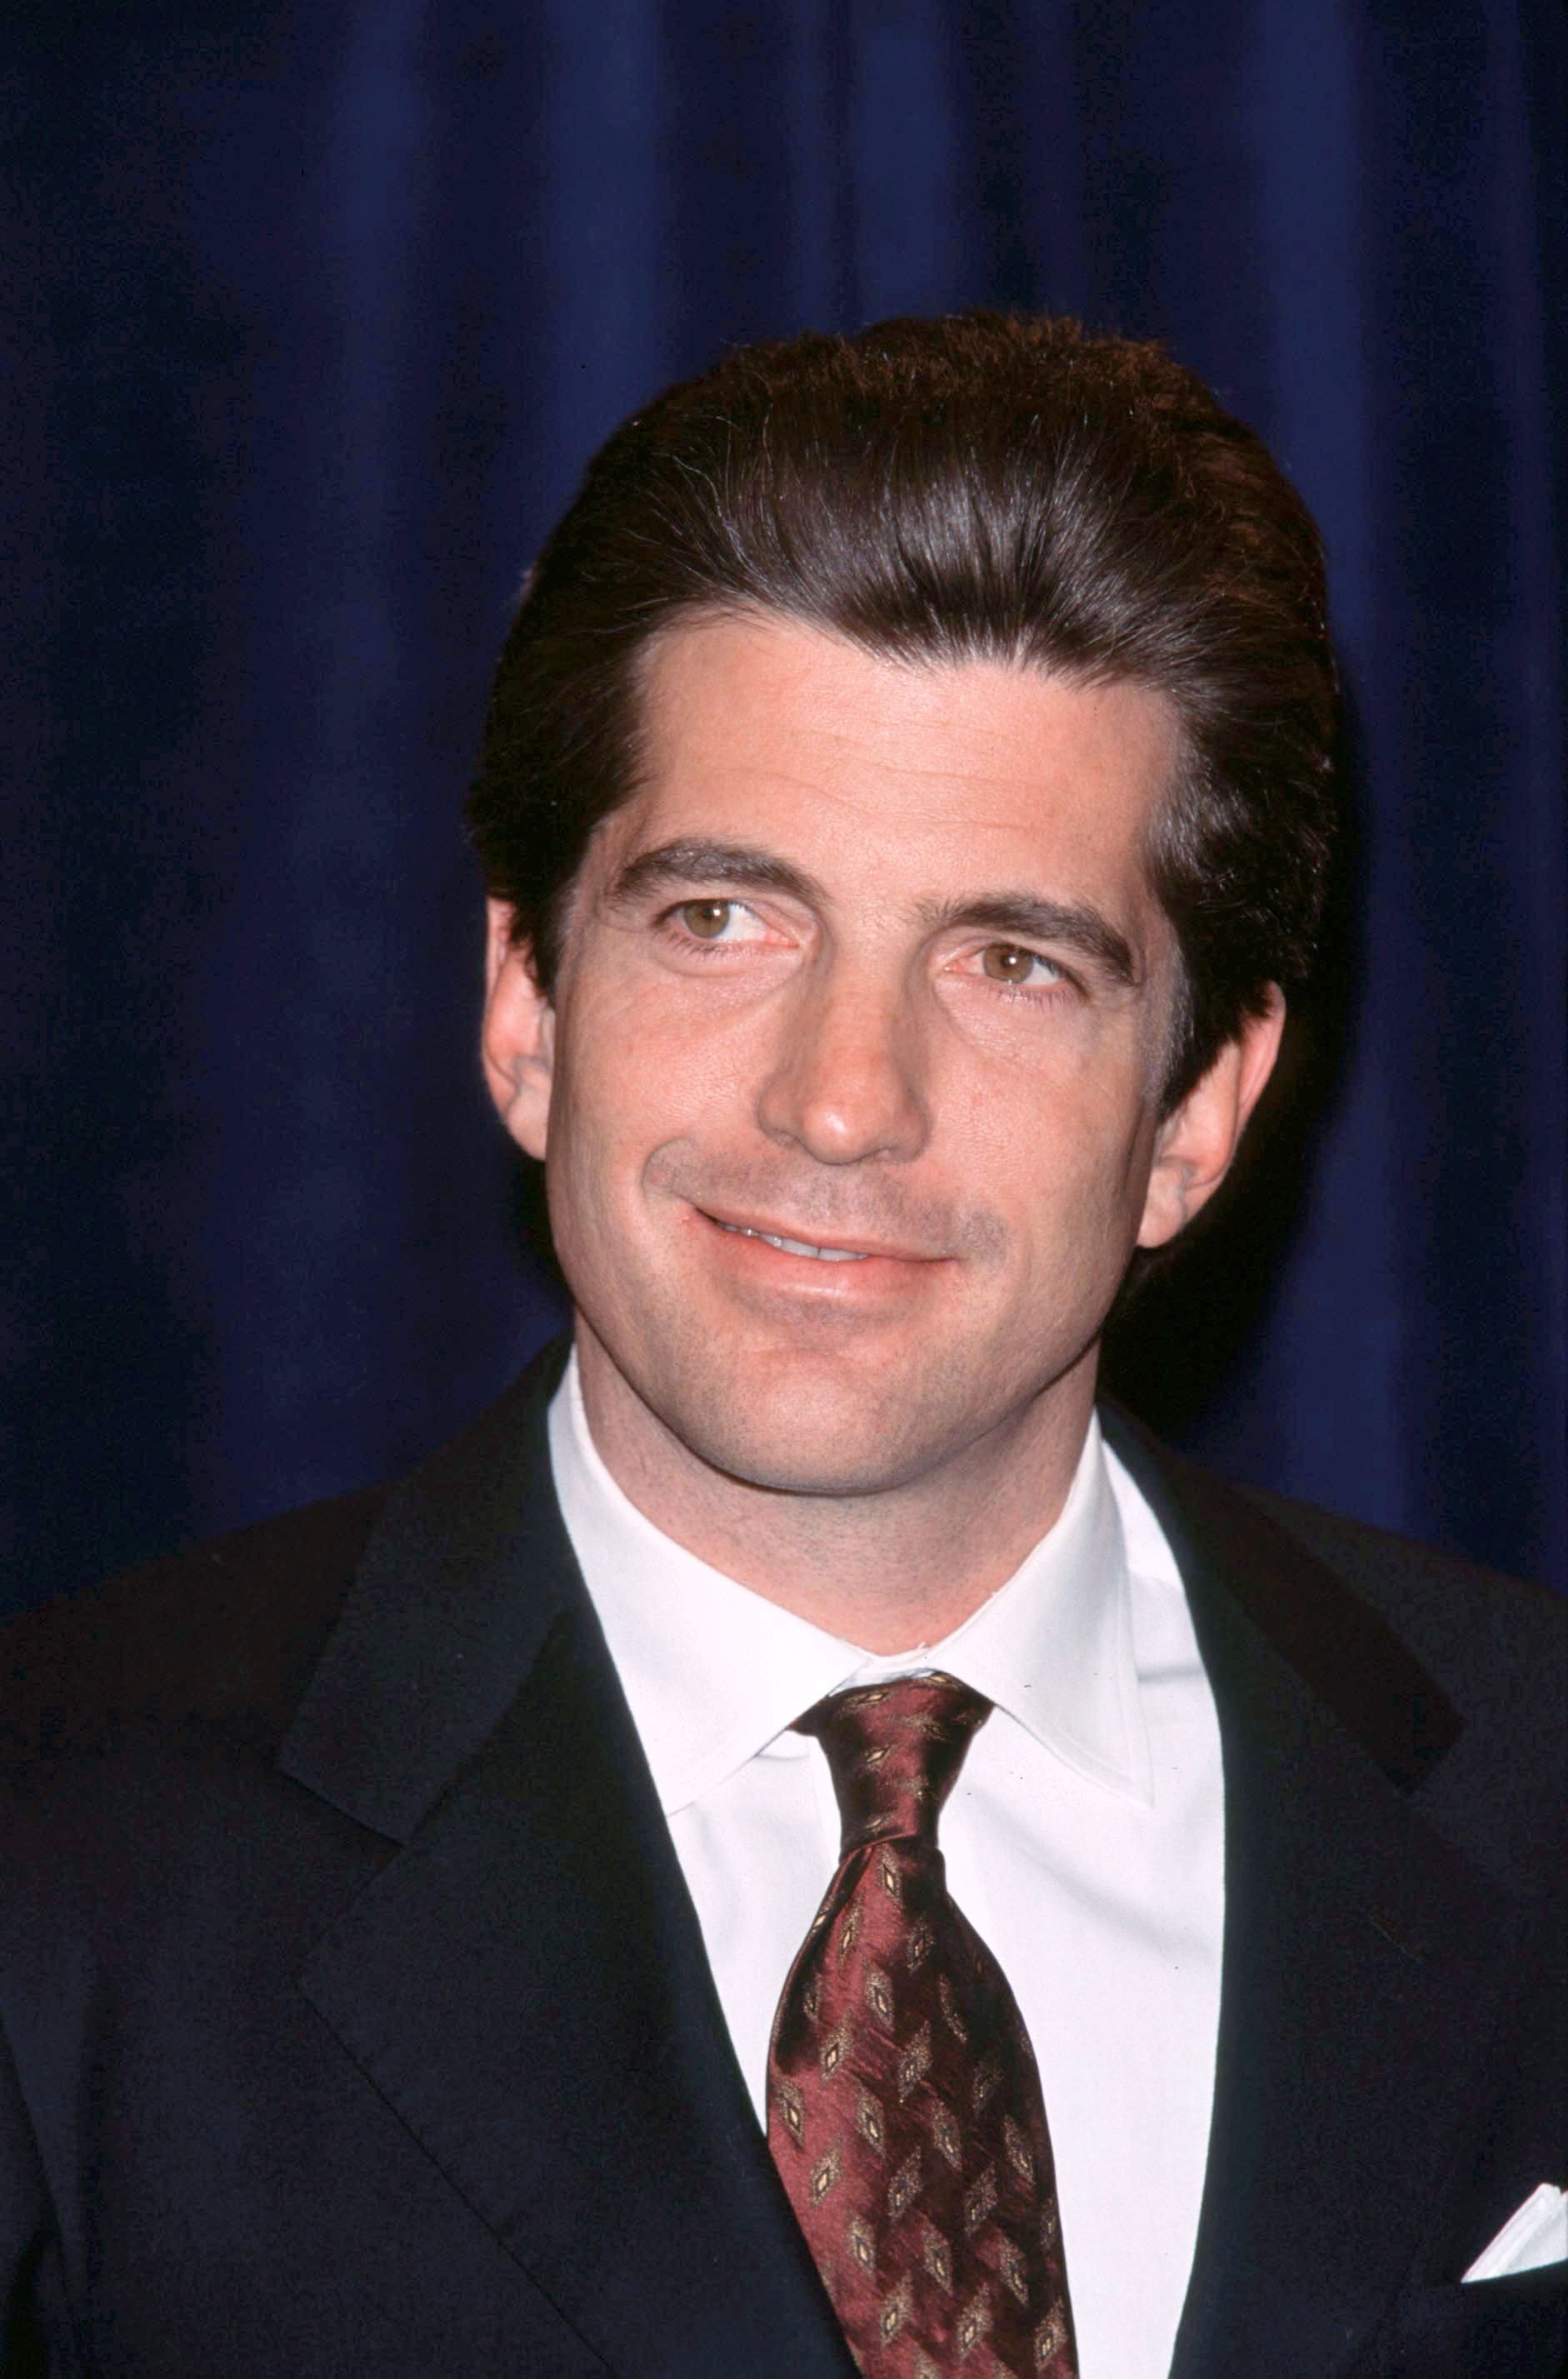 John F Kennedy Jr's Friends Speak Out about Him as He Would Have Turned 60